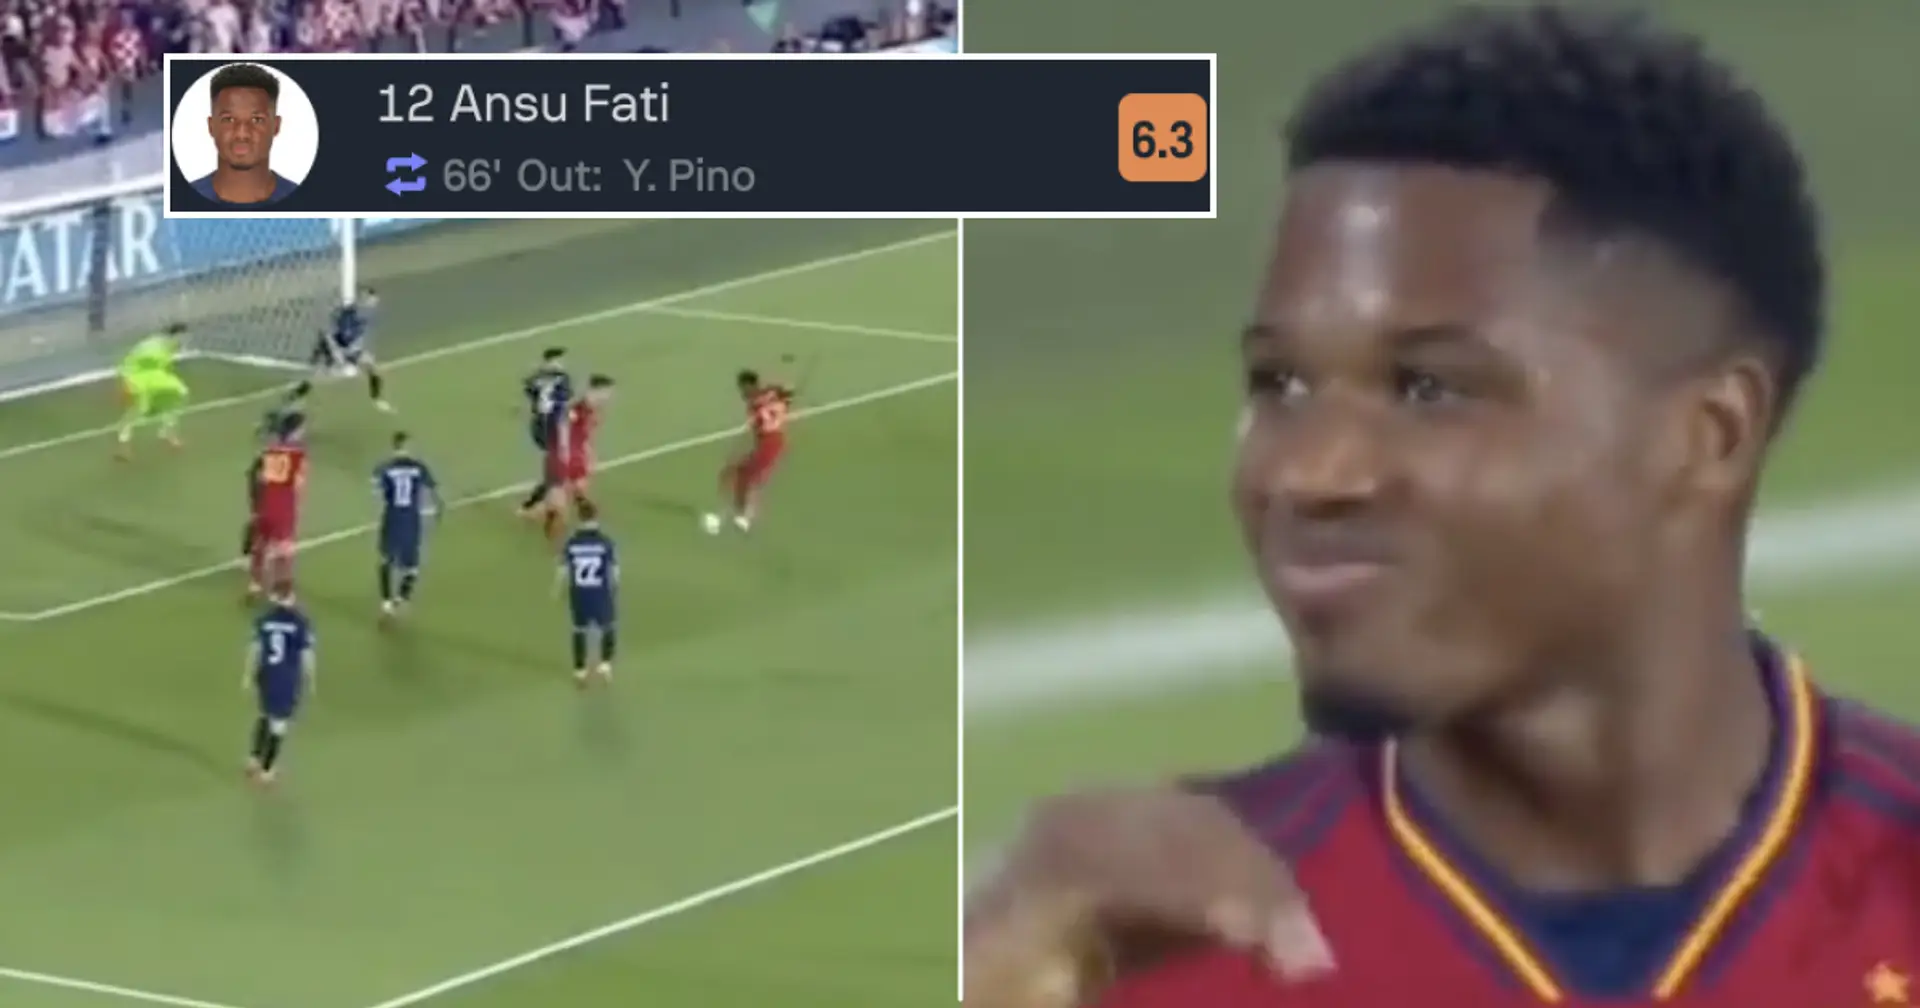 Was Ansu Fati actually good in Nations League final? Answered